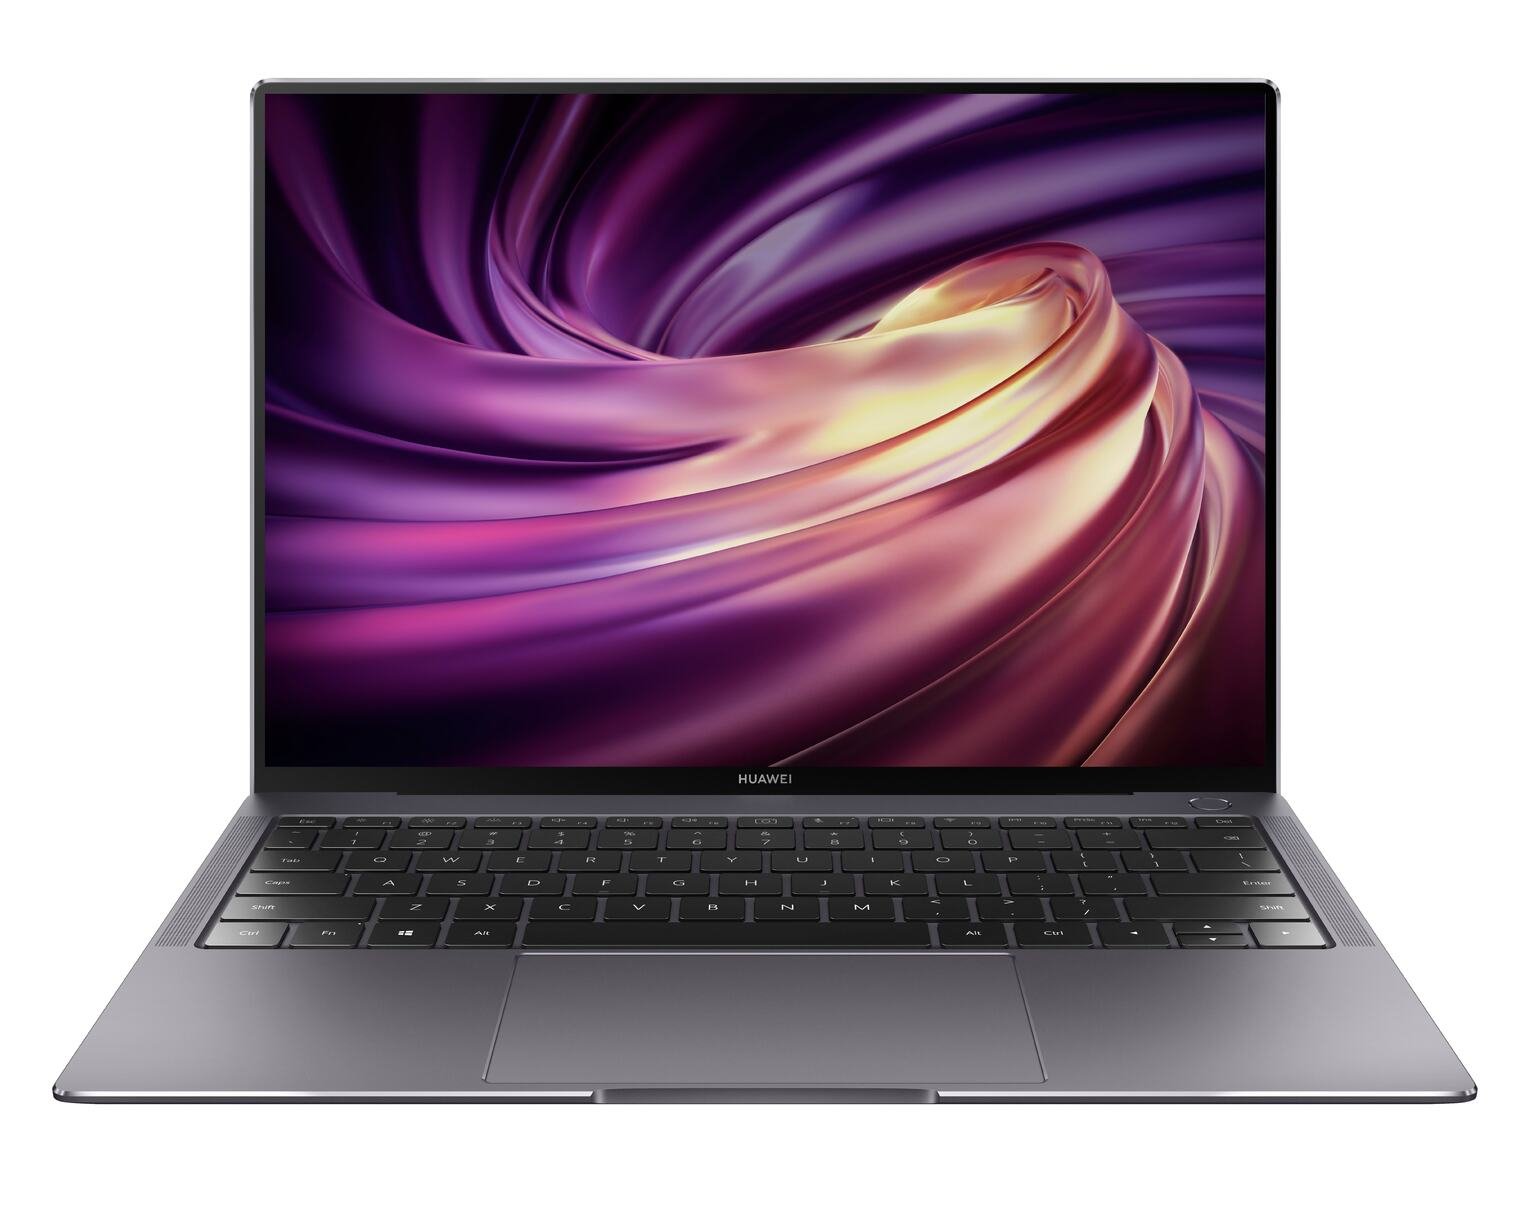 Huawei MateBook X Pro 2020 13.9in i7 16GB 1TB MX250 Laptop Review